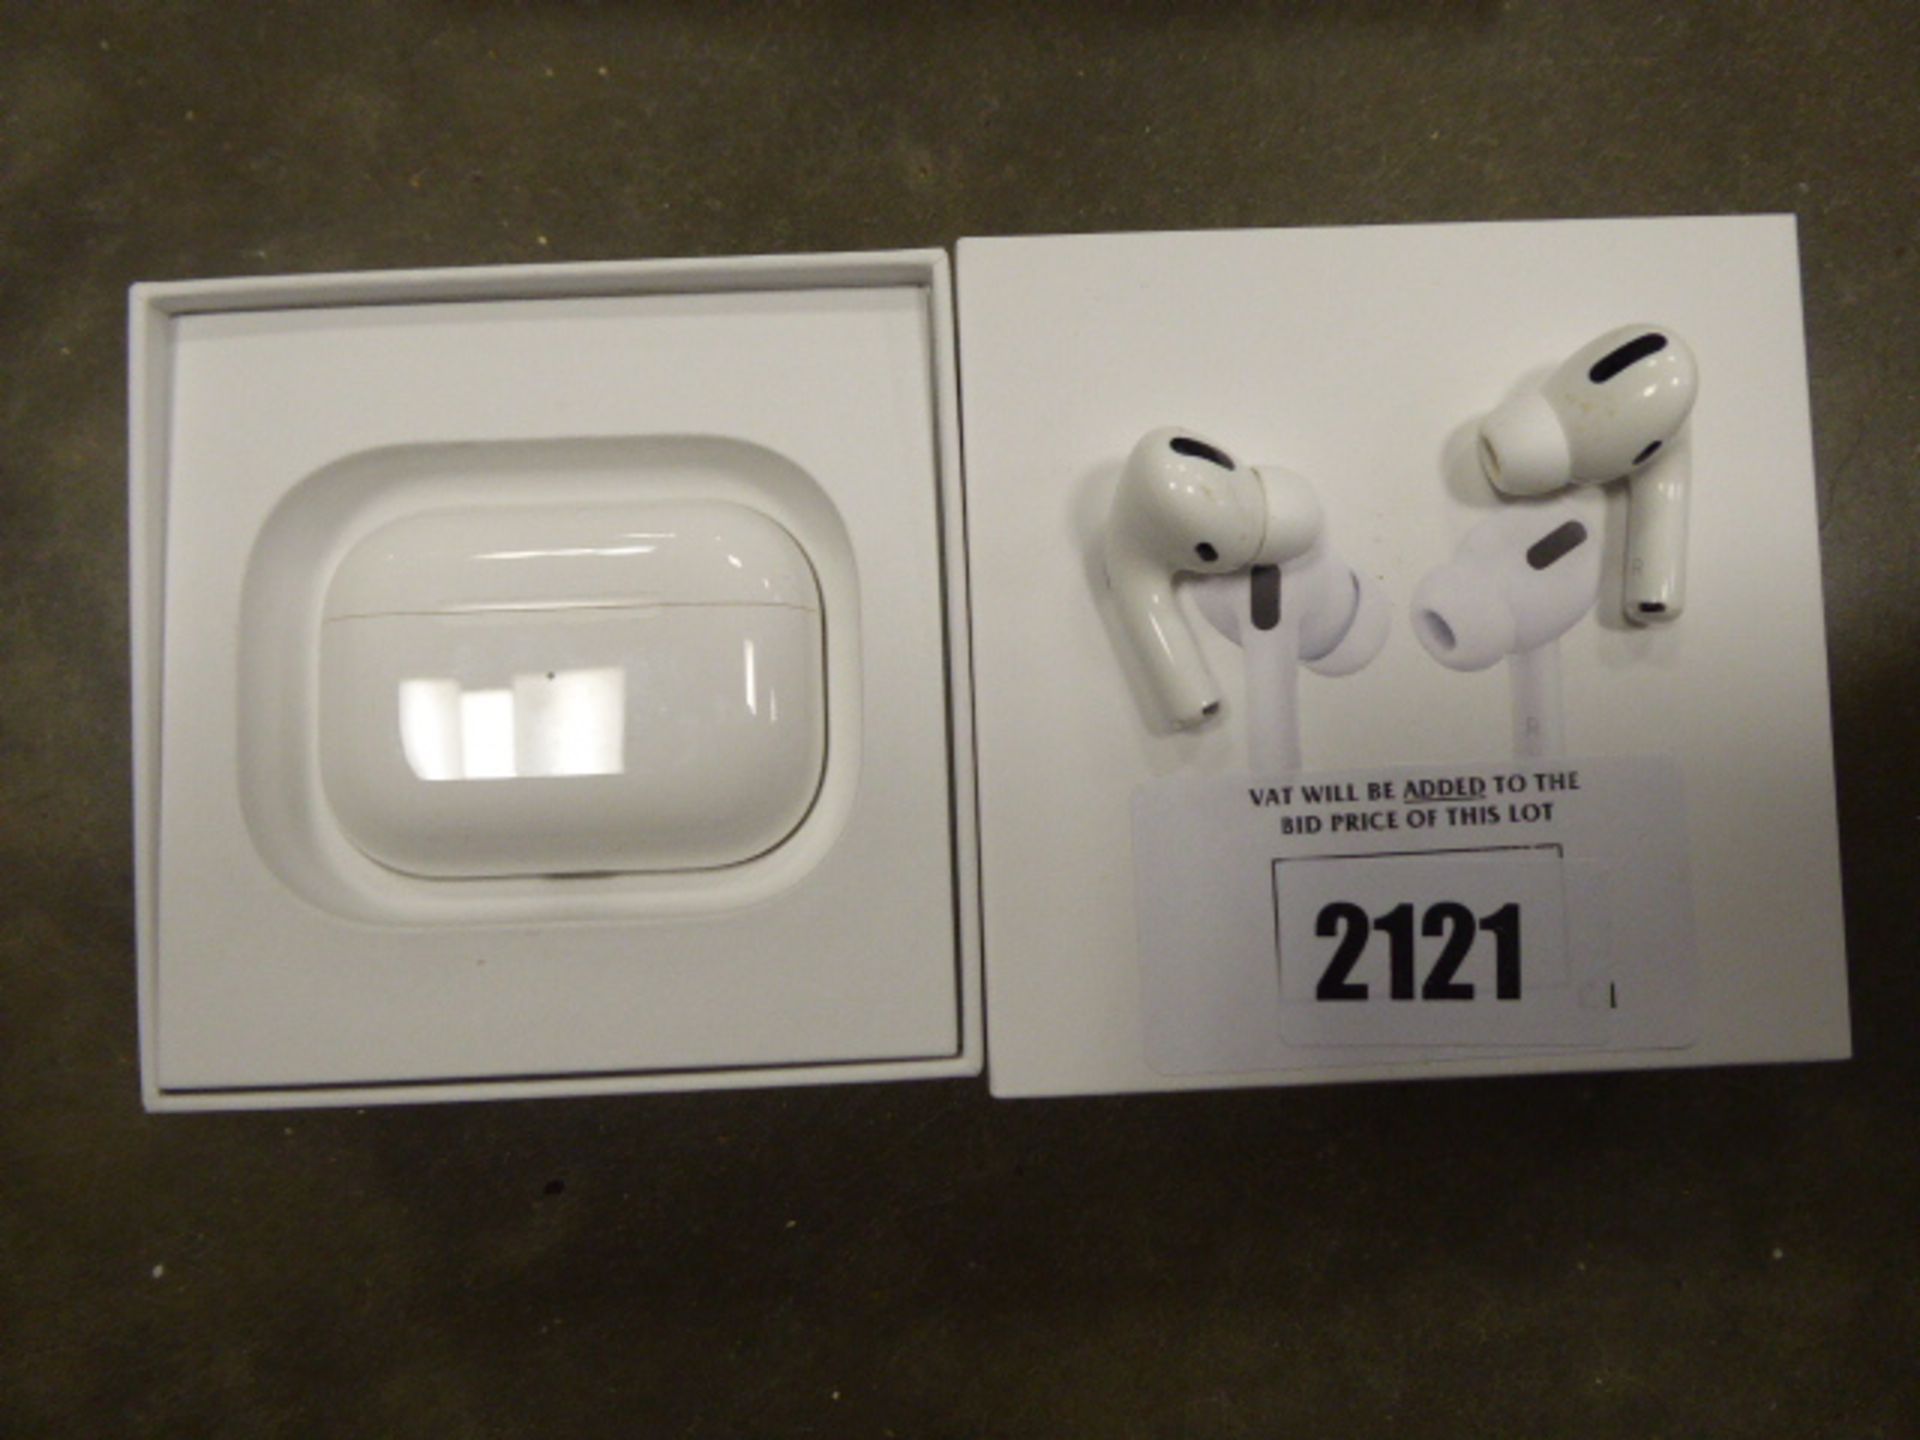 Pair of Apple AirPods with wireless charging case and box